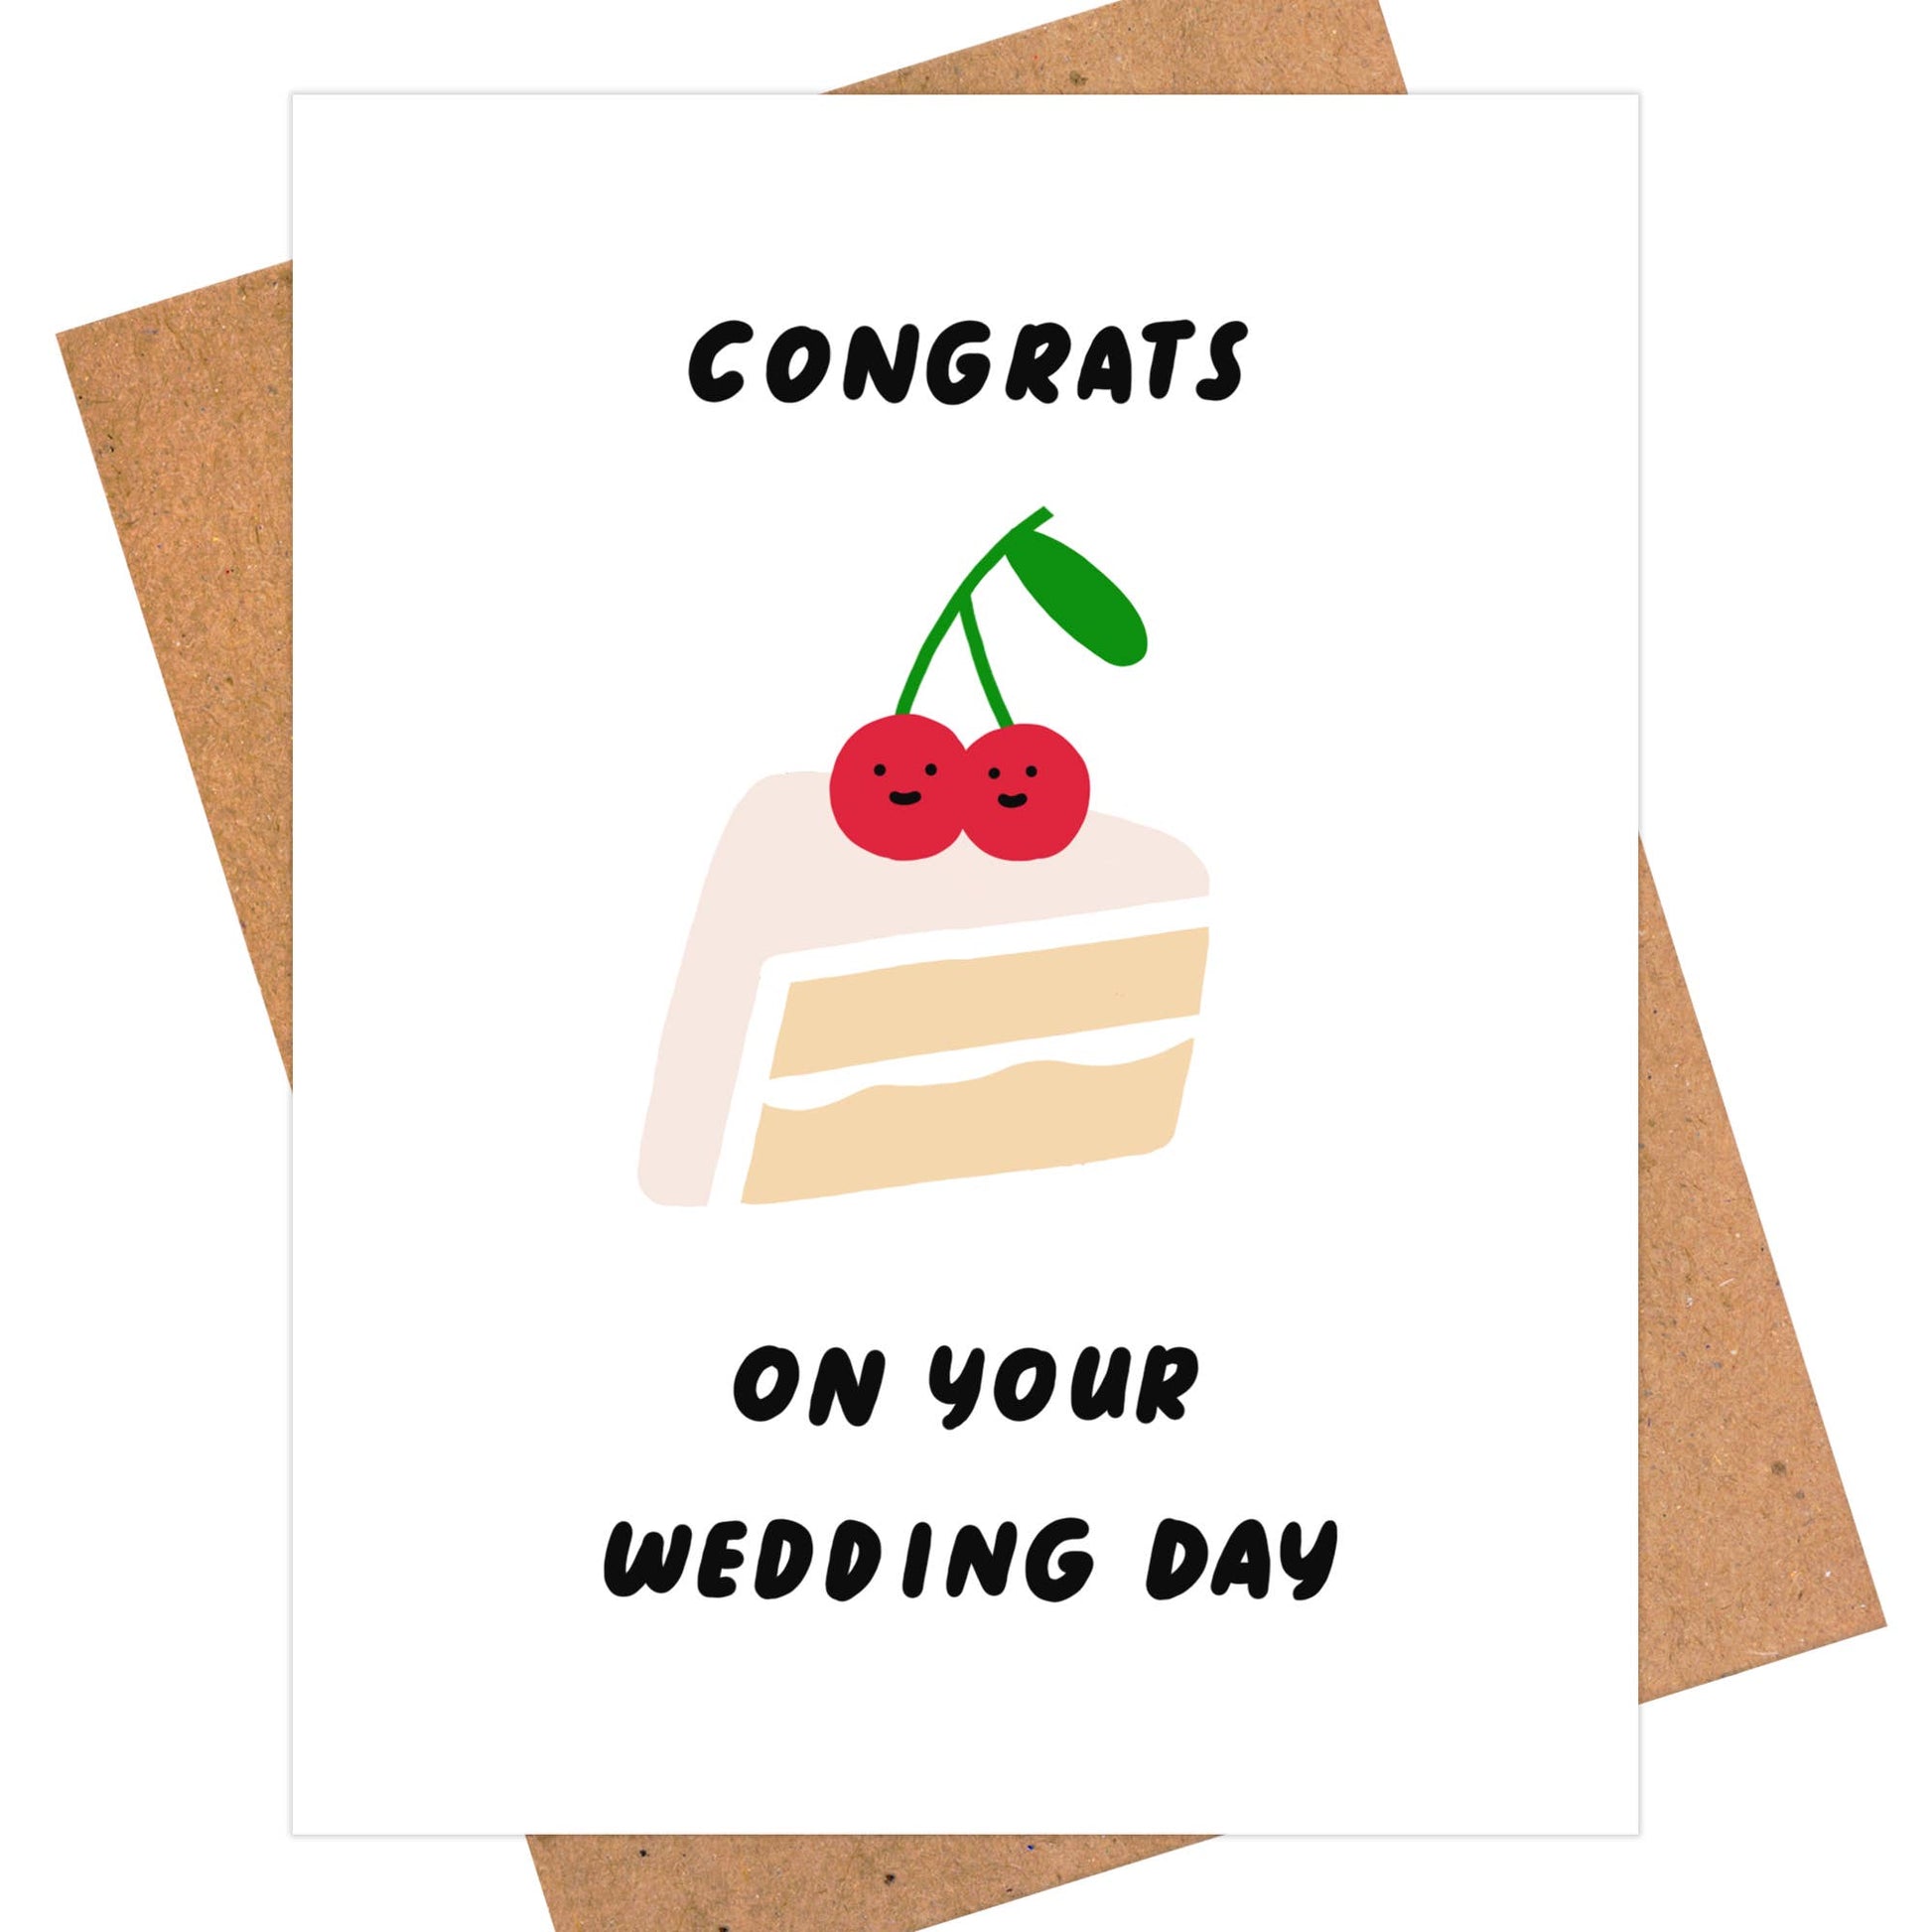 Wedding card that reads "Congrats on your wedding day" and has a slice of cake with two cherries on top 